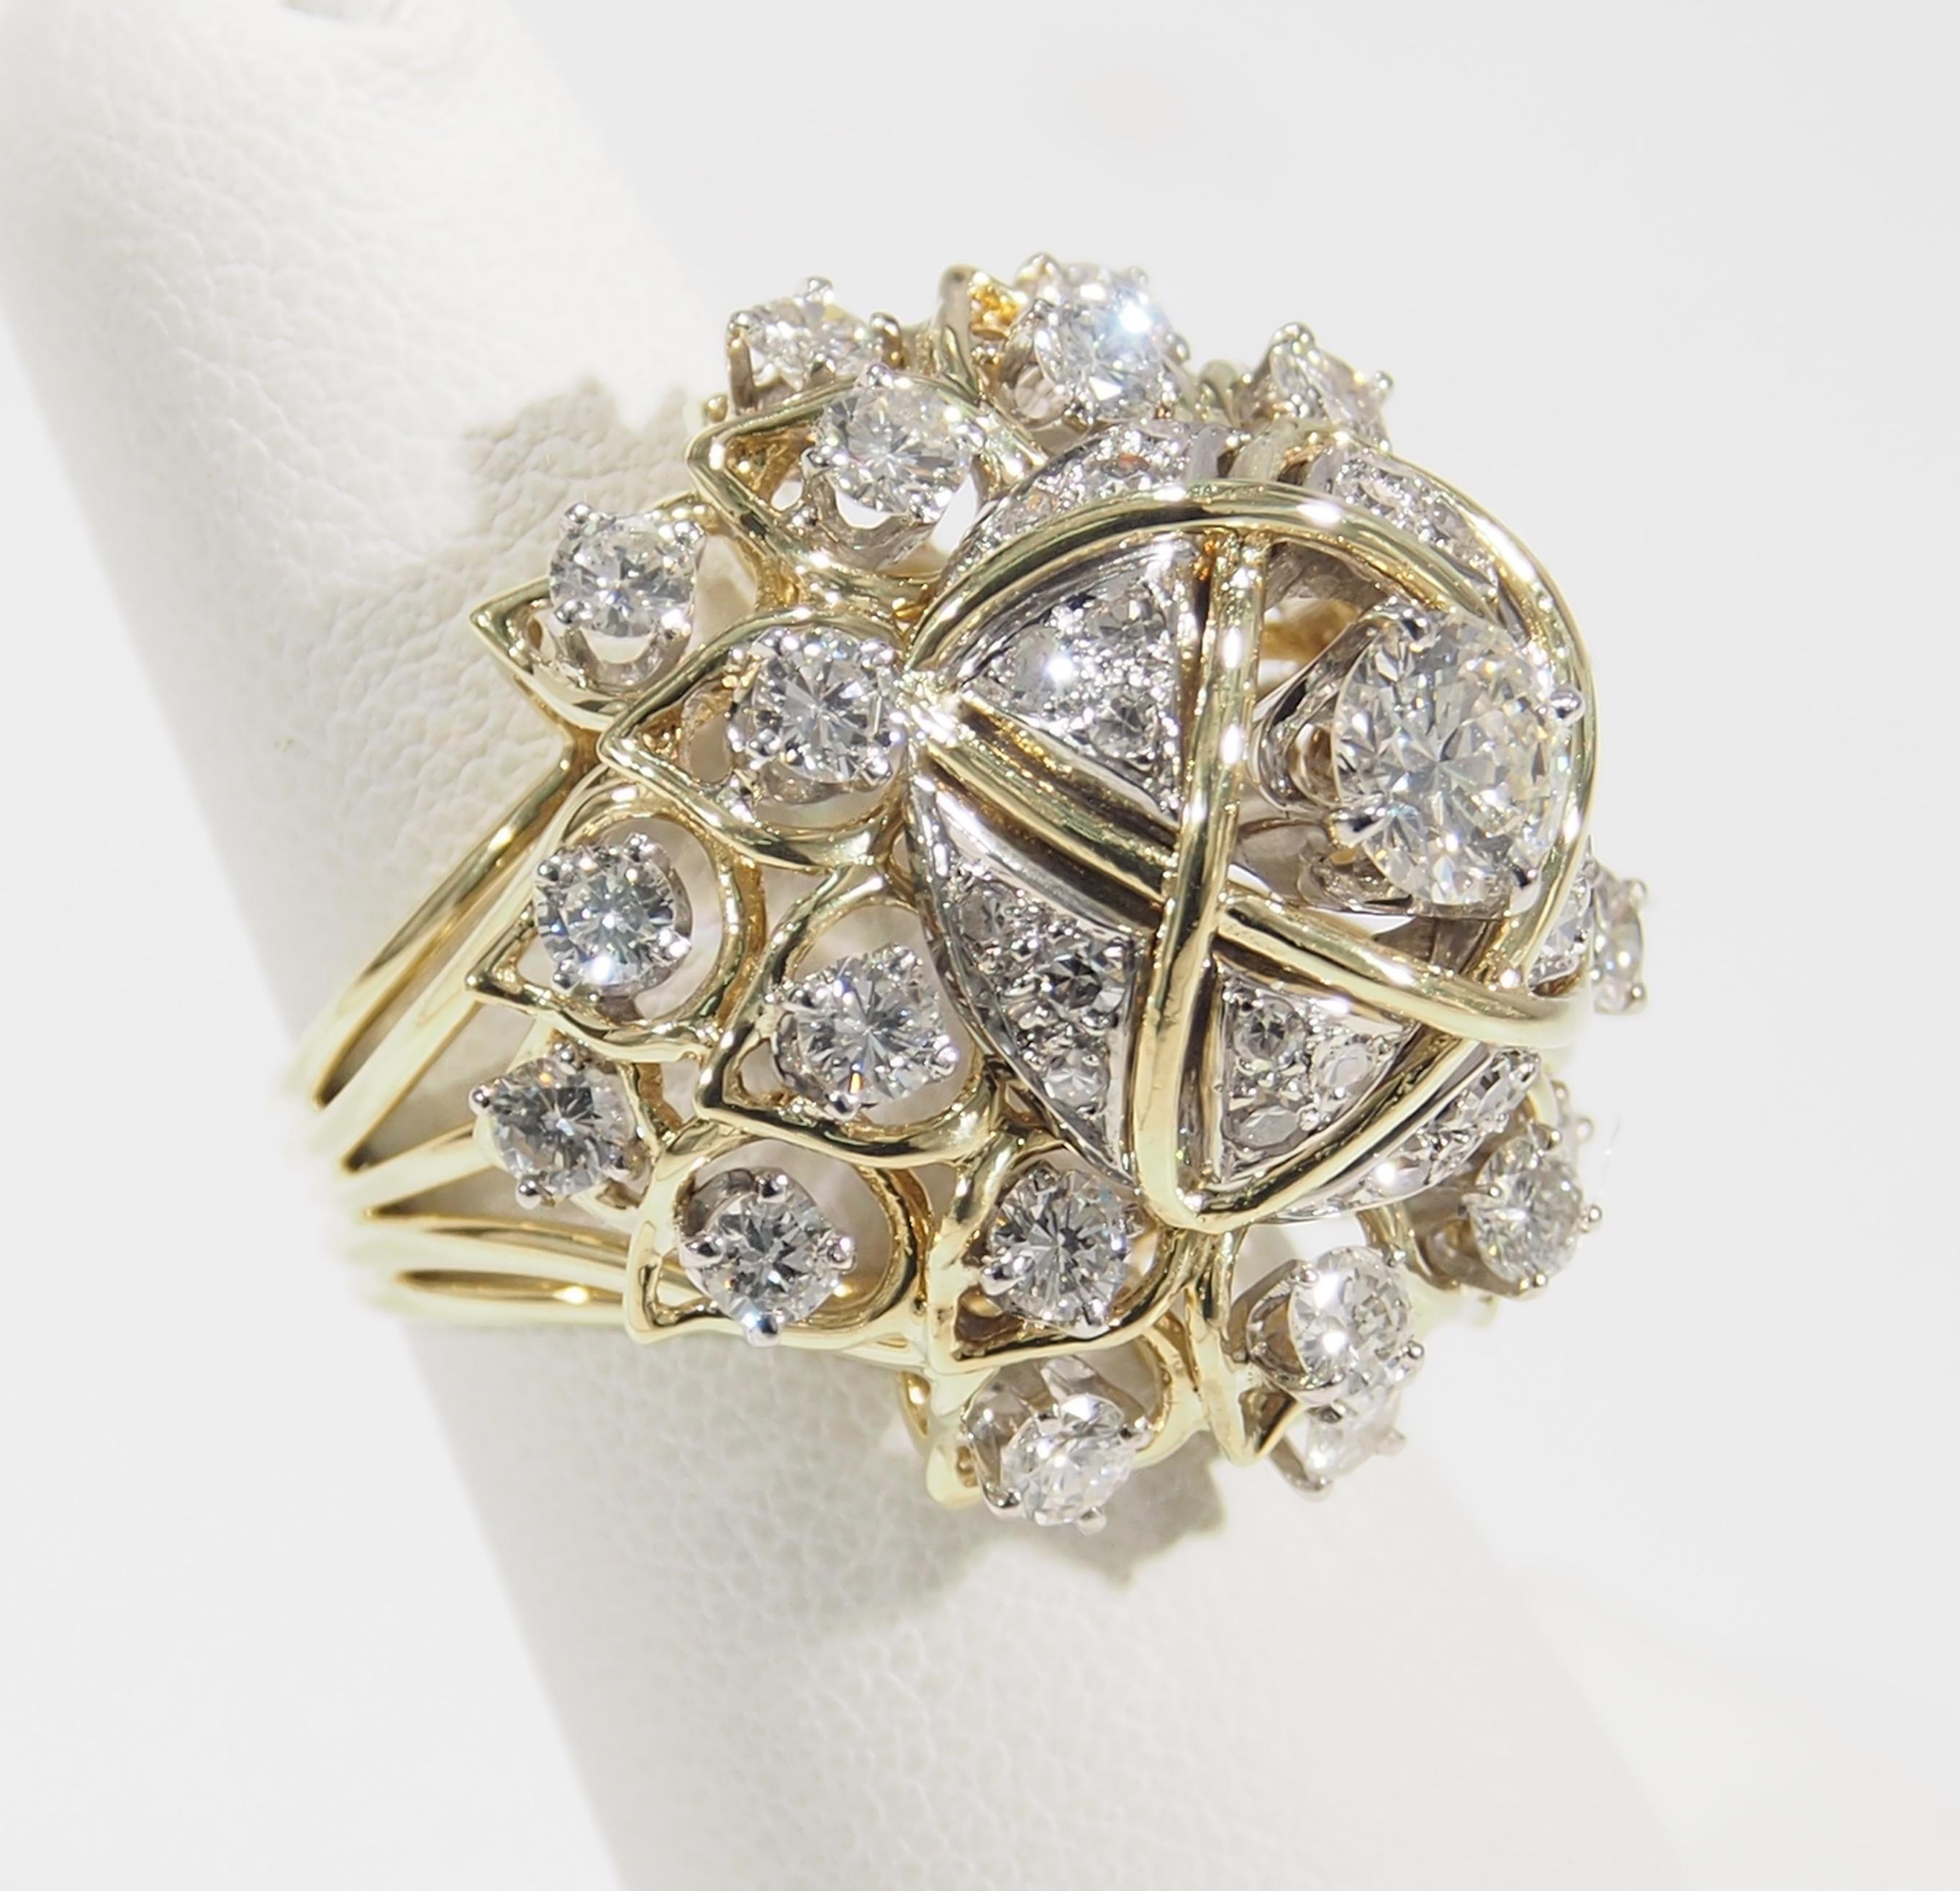 This is a magnificent 18K Yellow Gold Ring fashioned with a 1 inch Dome set with sparkling Diamonds. The Dome is designed with strands of Gold accented with (81) Round Brilliant Cut Diamonds, approximately 3.92ctw, G-I in Color, VS in Clarity.  A